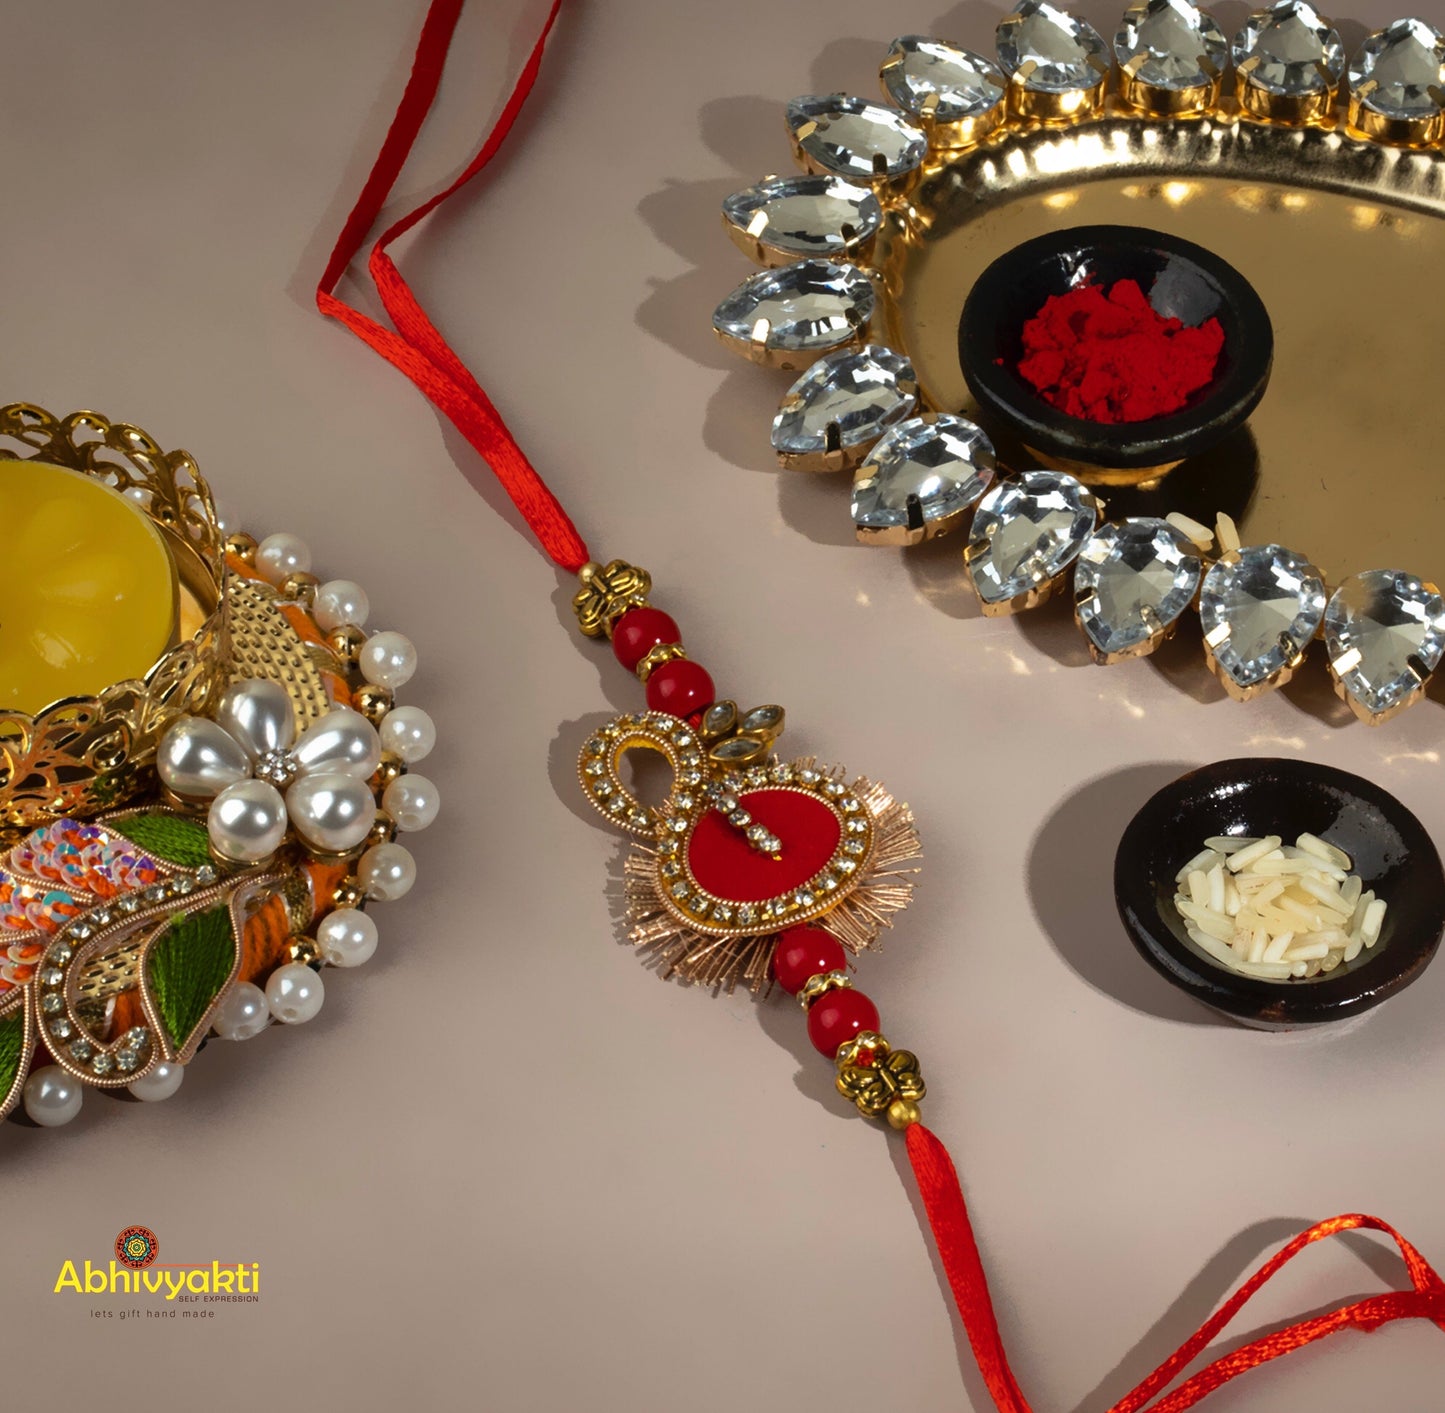 Red and orange rakhi with gold bead, adorned with stone - a beautiful traditional symbol of love and protection.